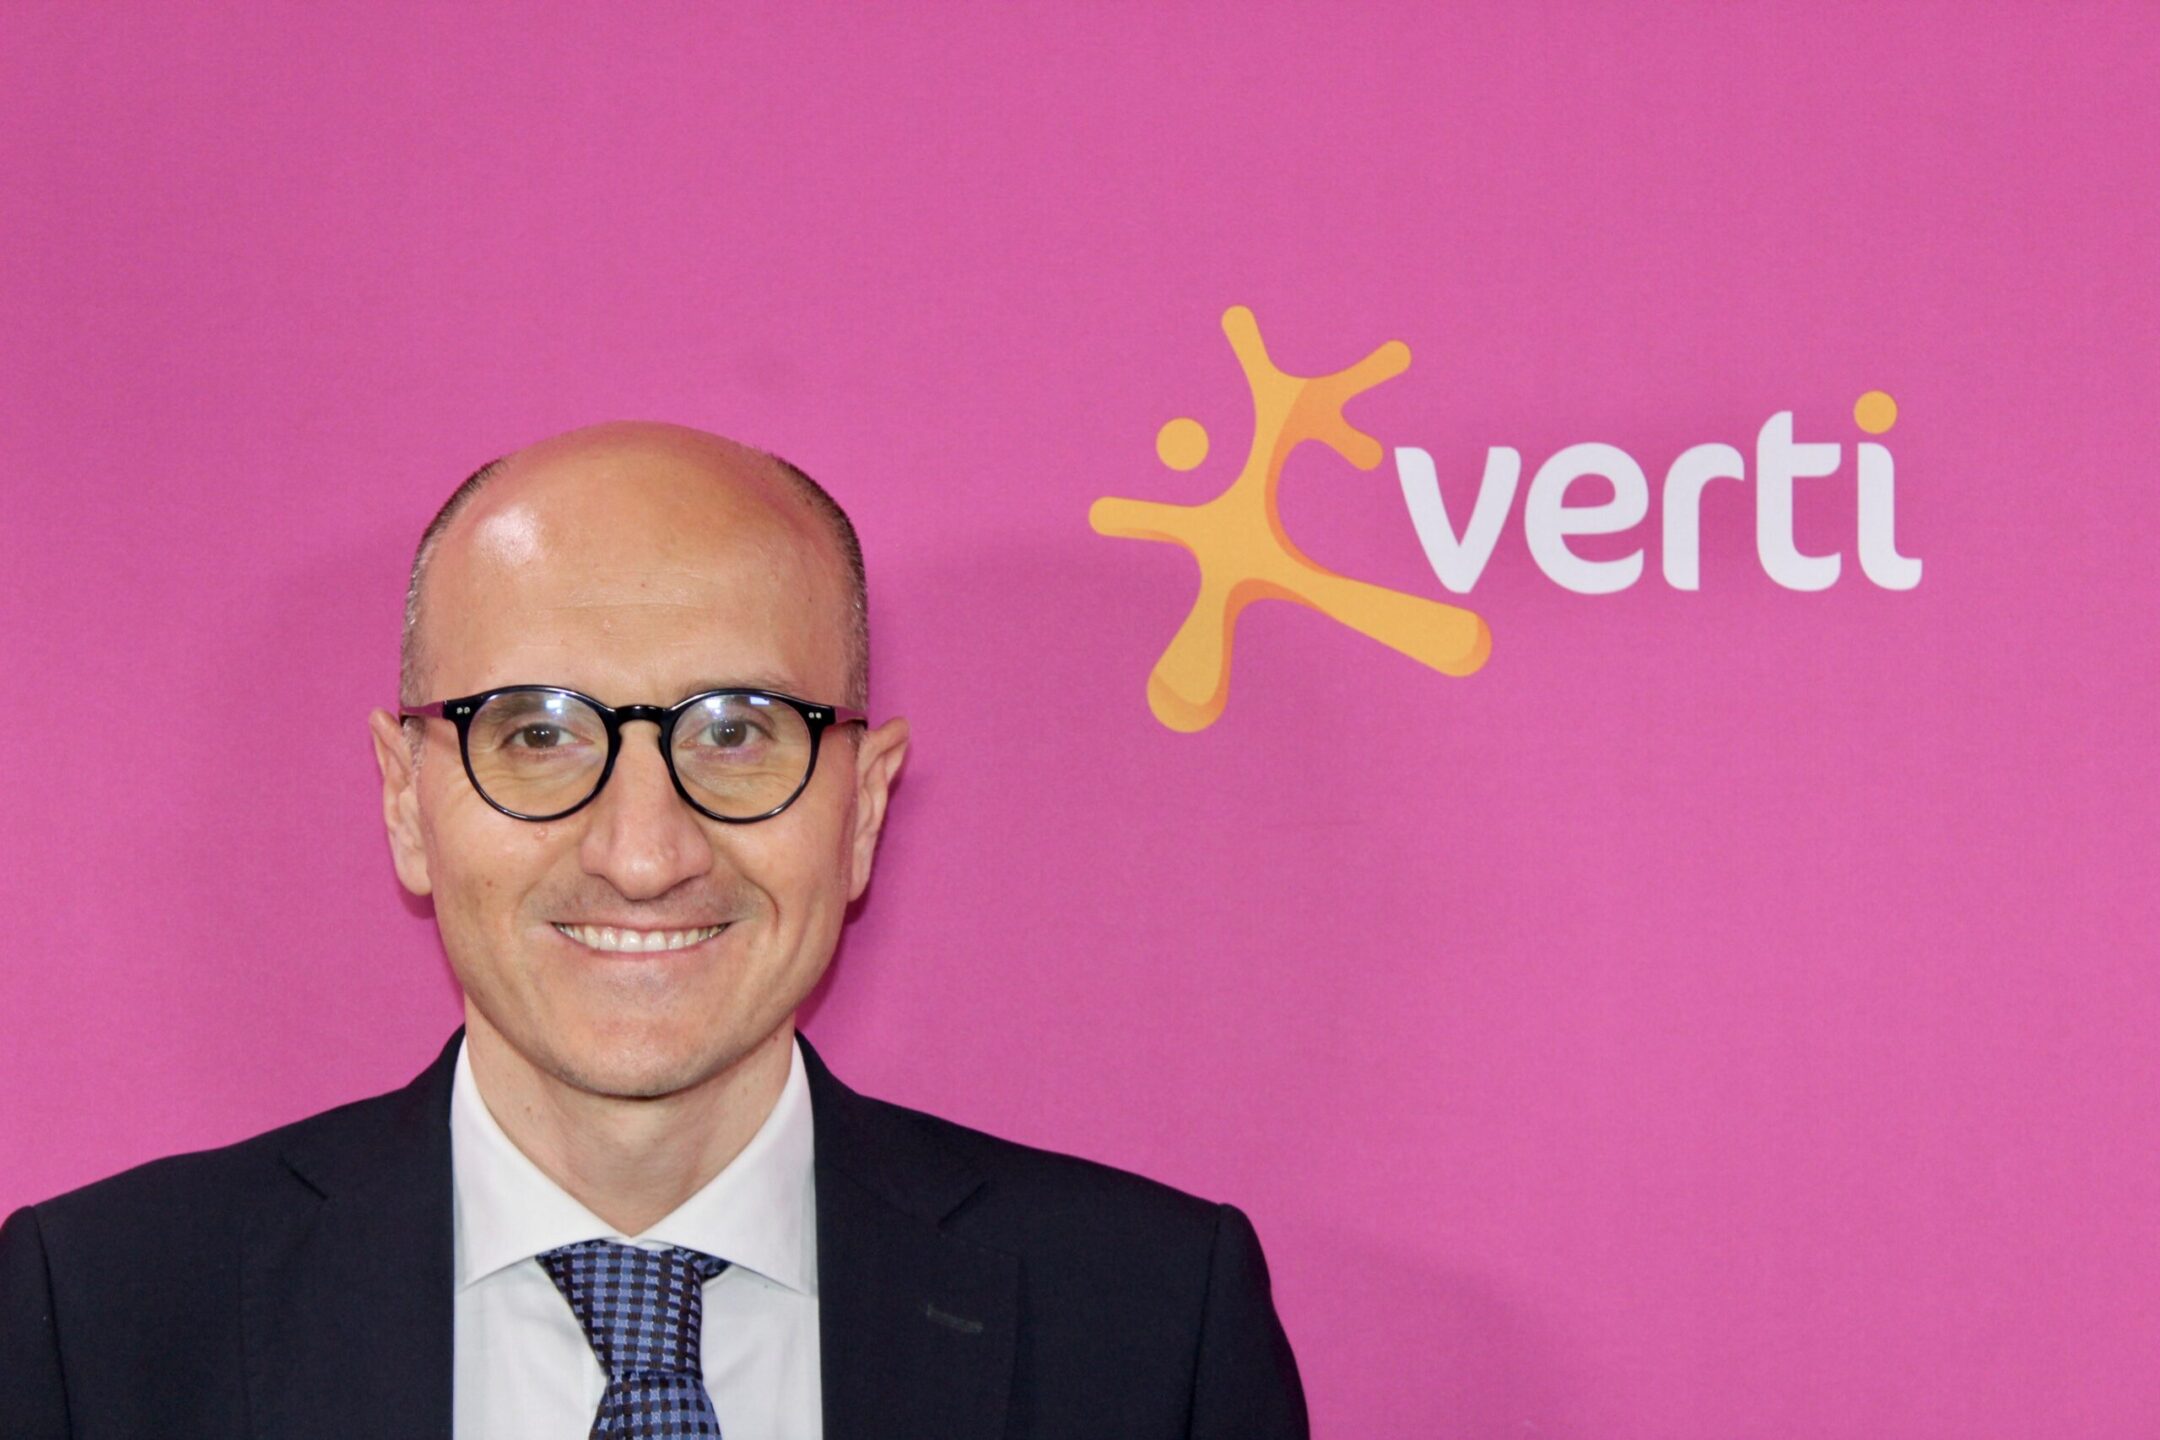 Marco Buccigrossi, direct business director